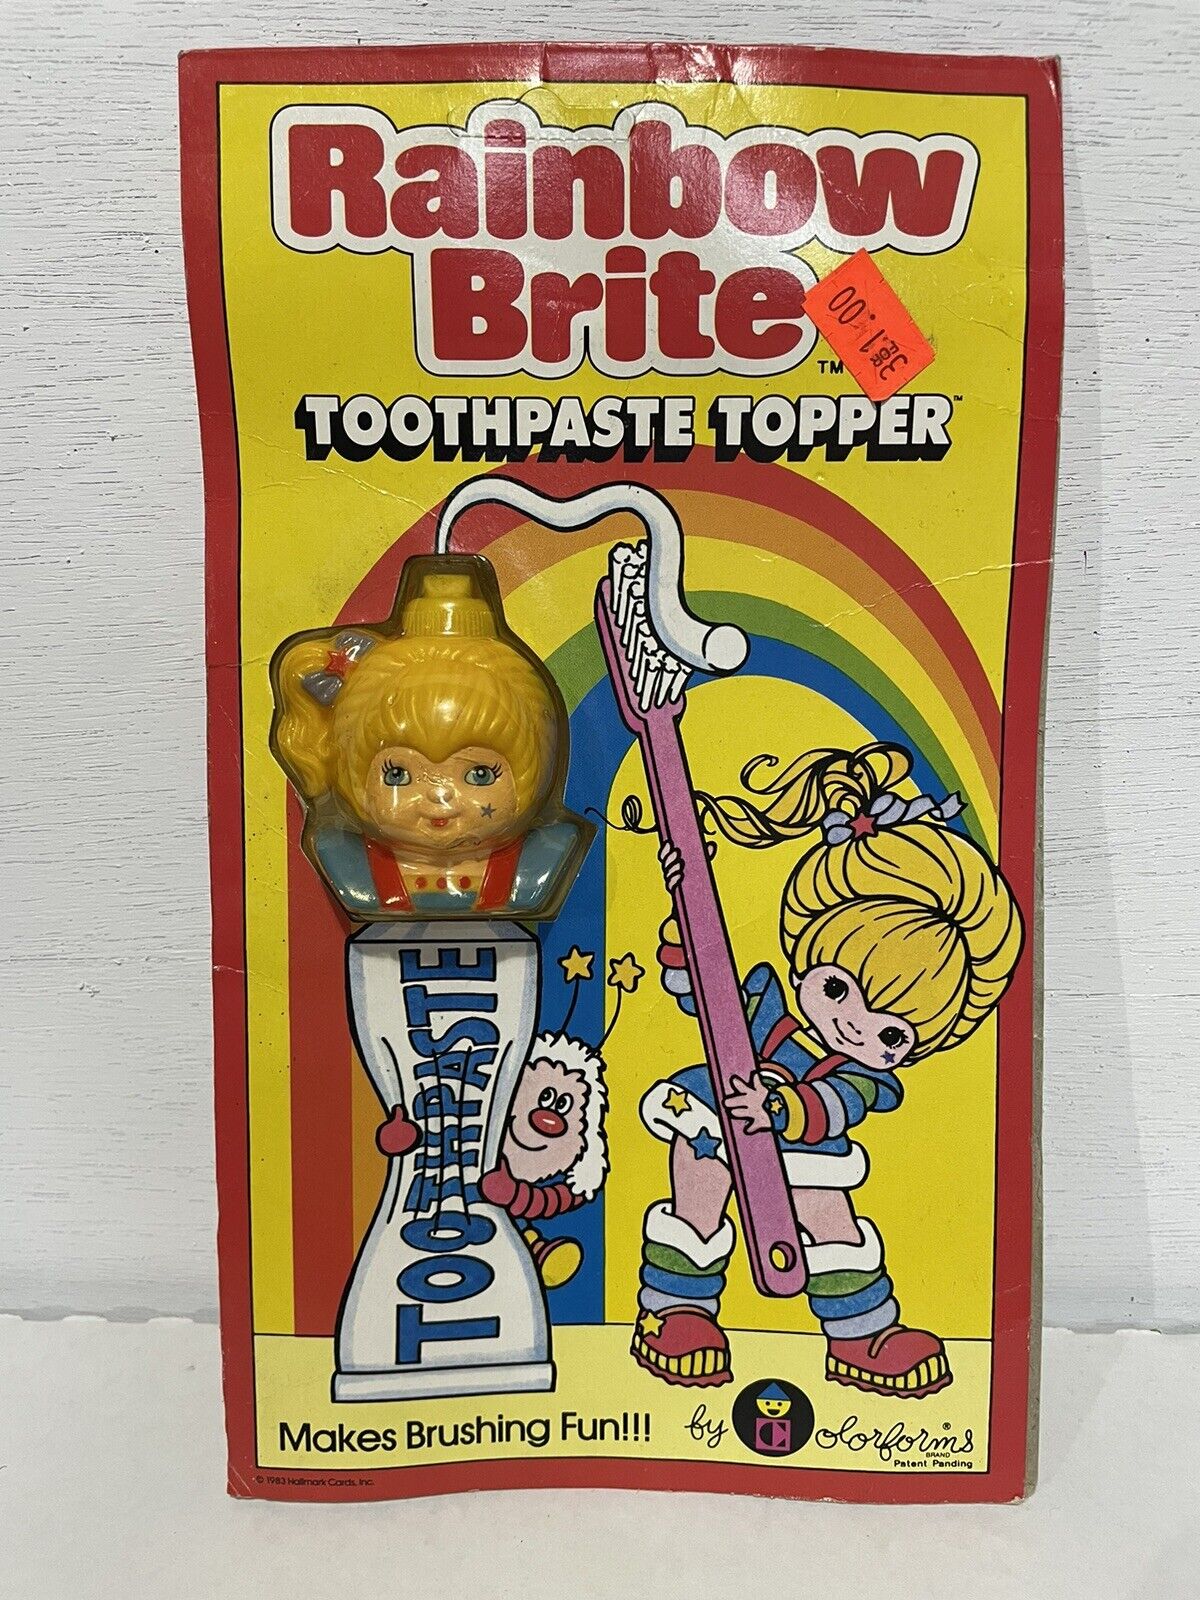 VINTAGE 1983 RAINBOW BRITE TOOTHPASTE TOPPER BY COLORFORMS NEW SEALED